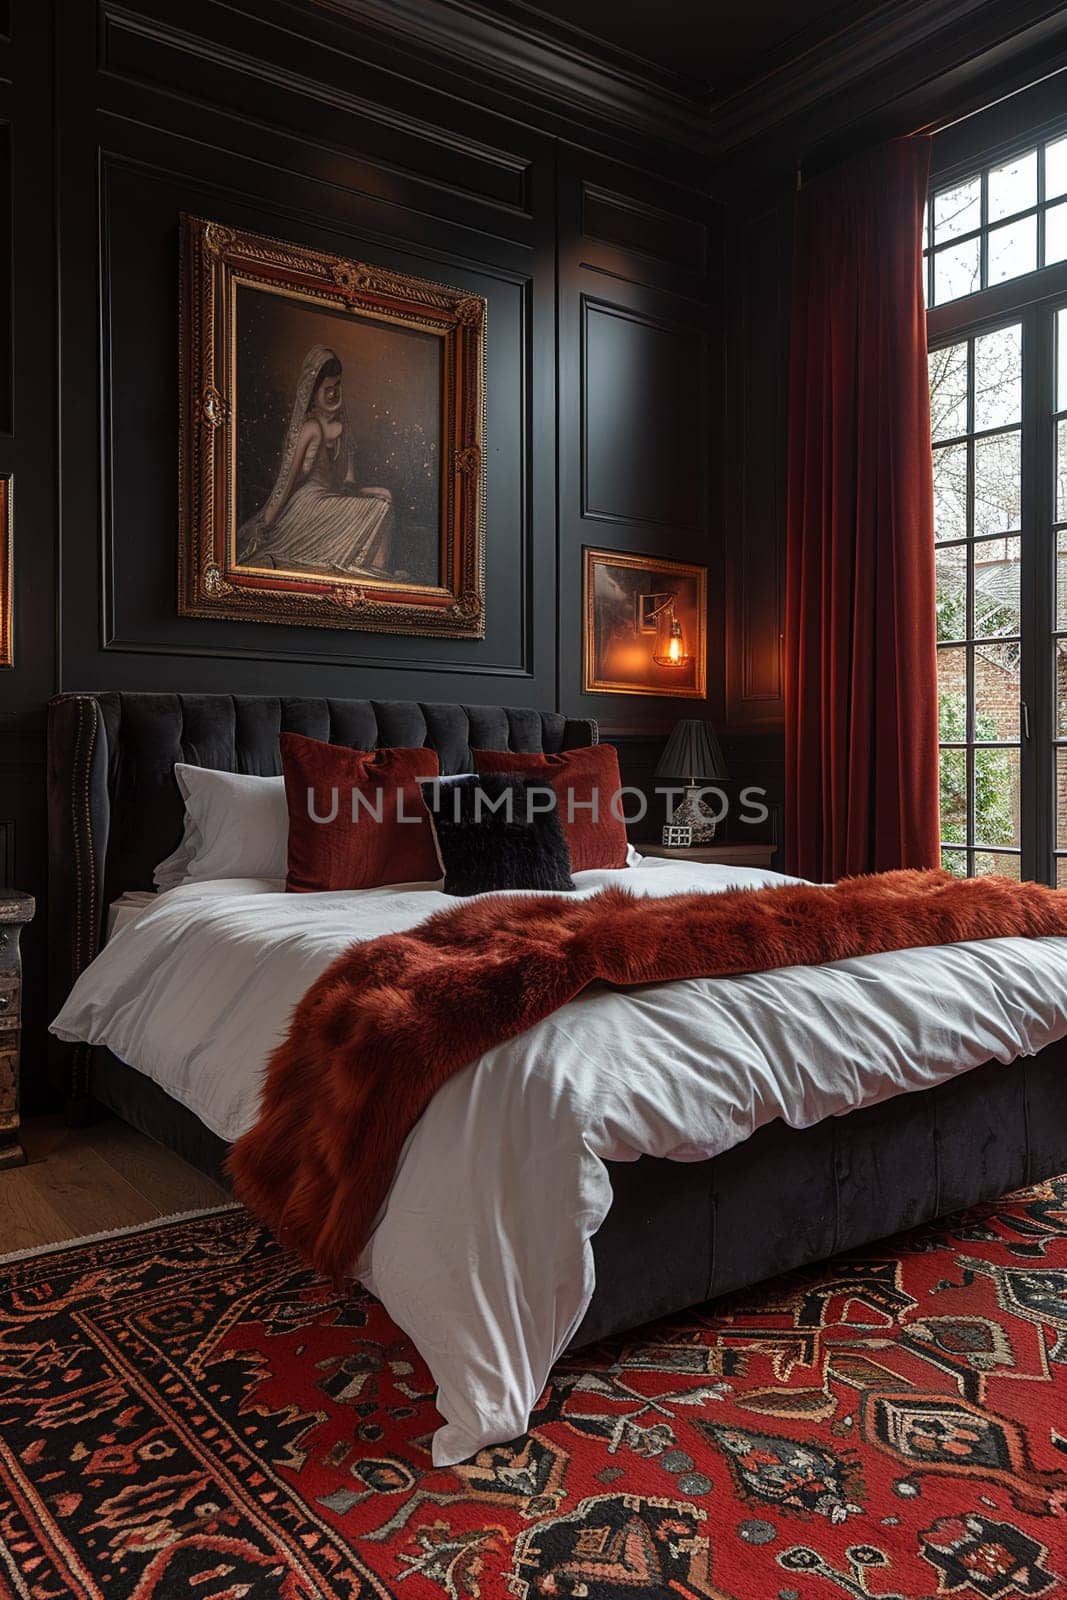 Modern Gothic bedroom with dark colors and dramatic decor8K by Benzoix